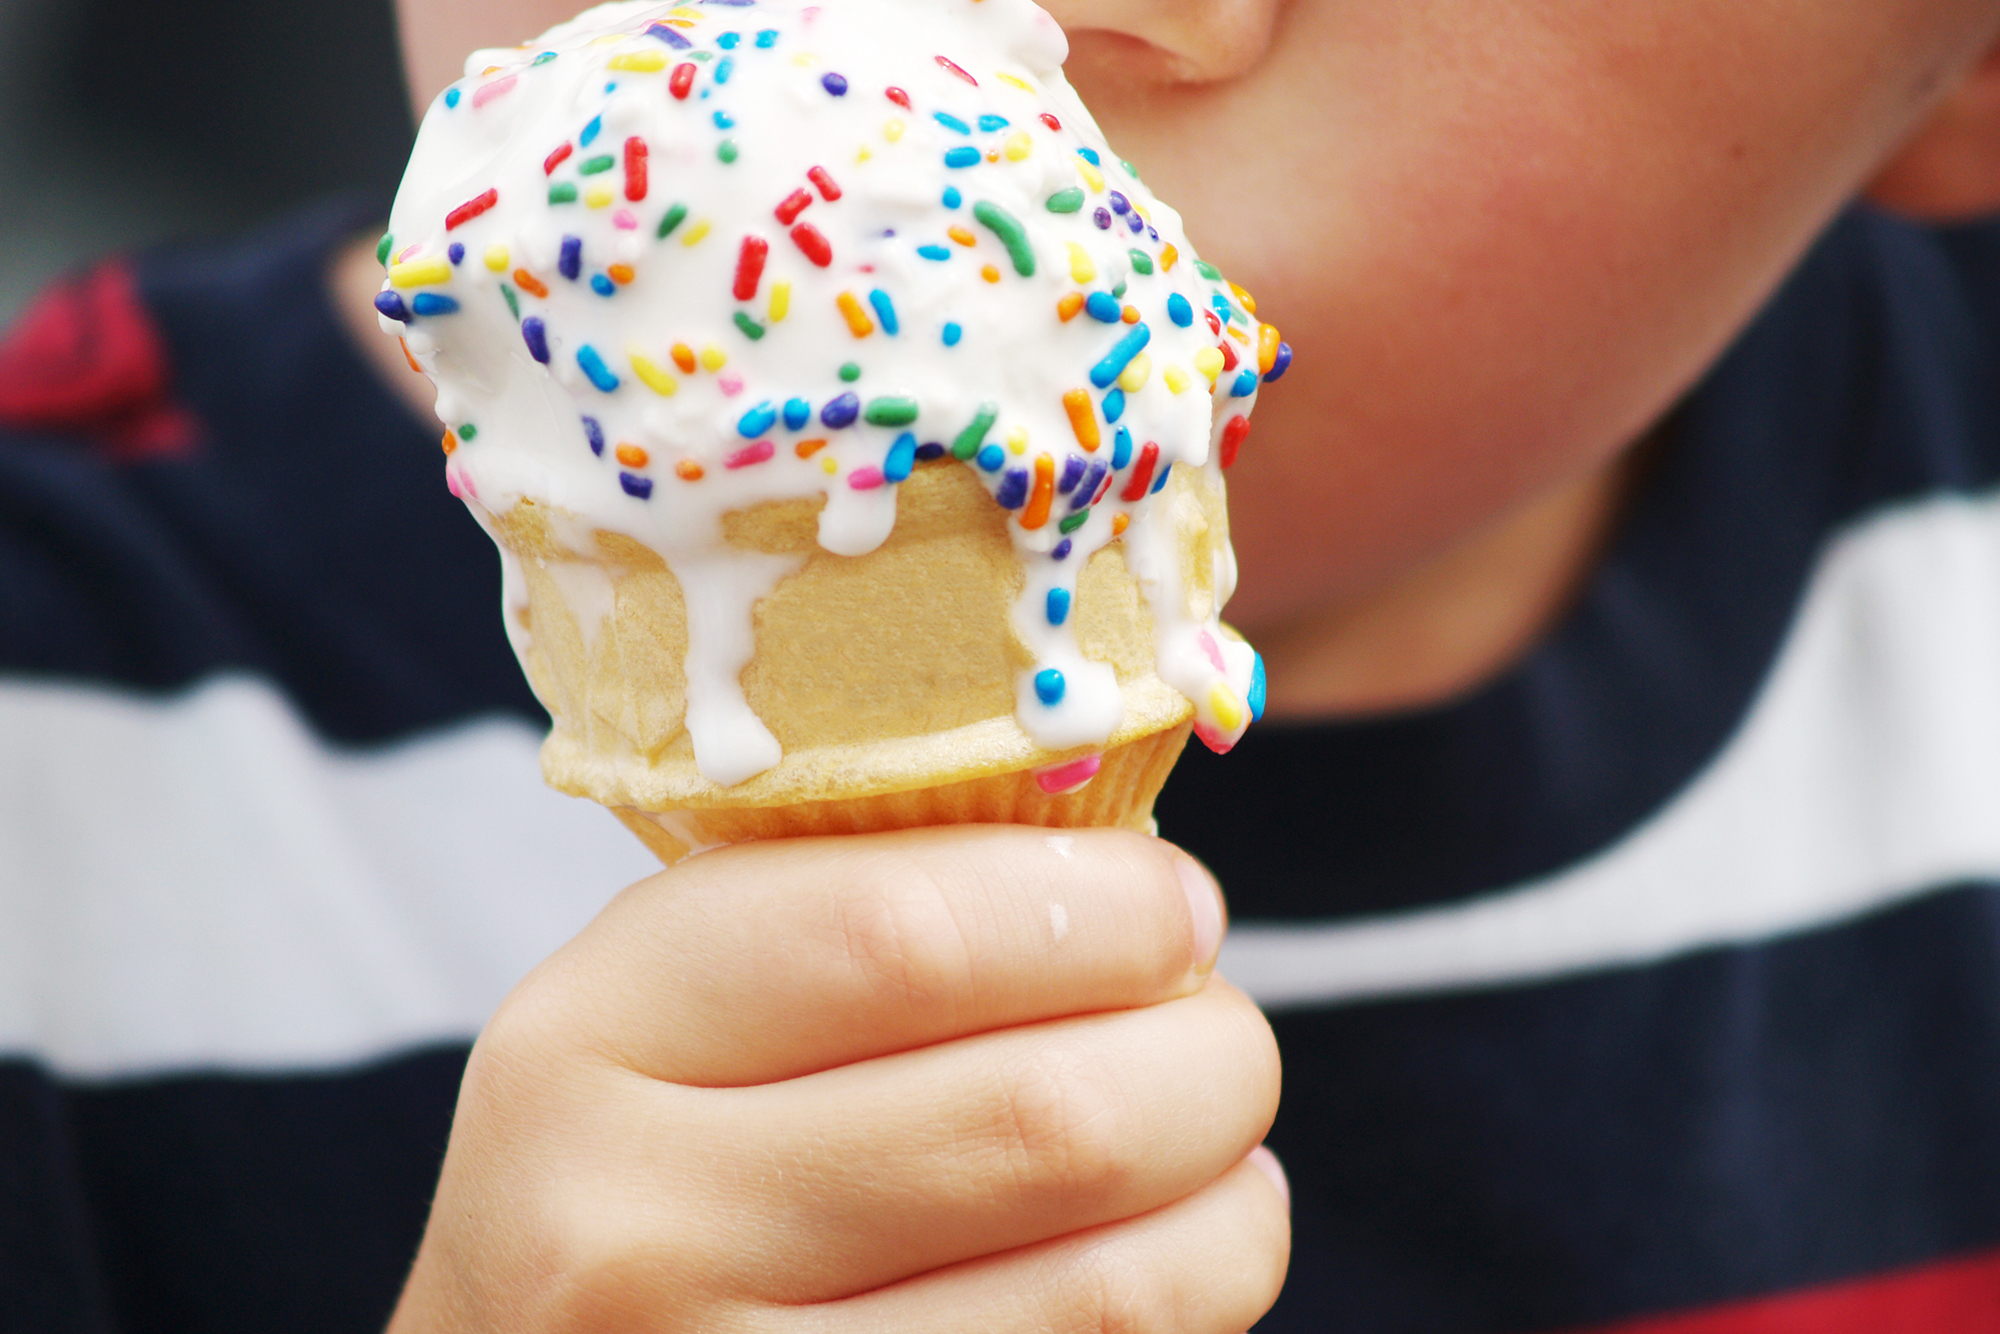 Does Ice Cream Make You Fat: Debunking Ice Cream Weight Gain Myths